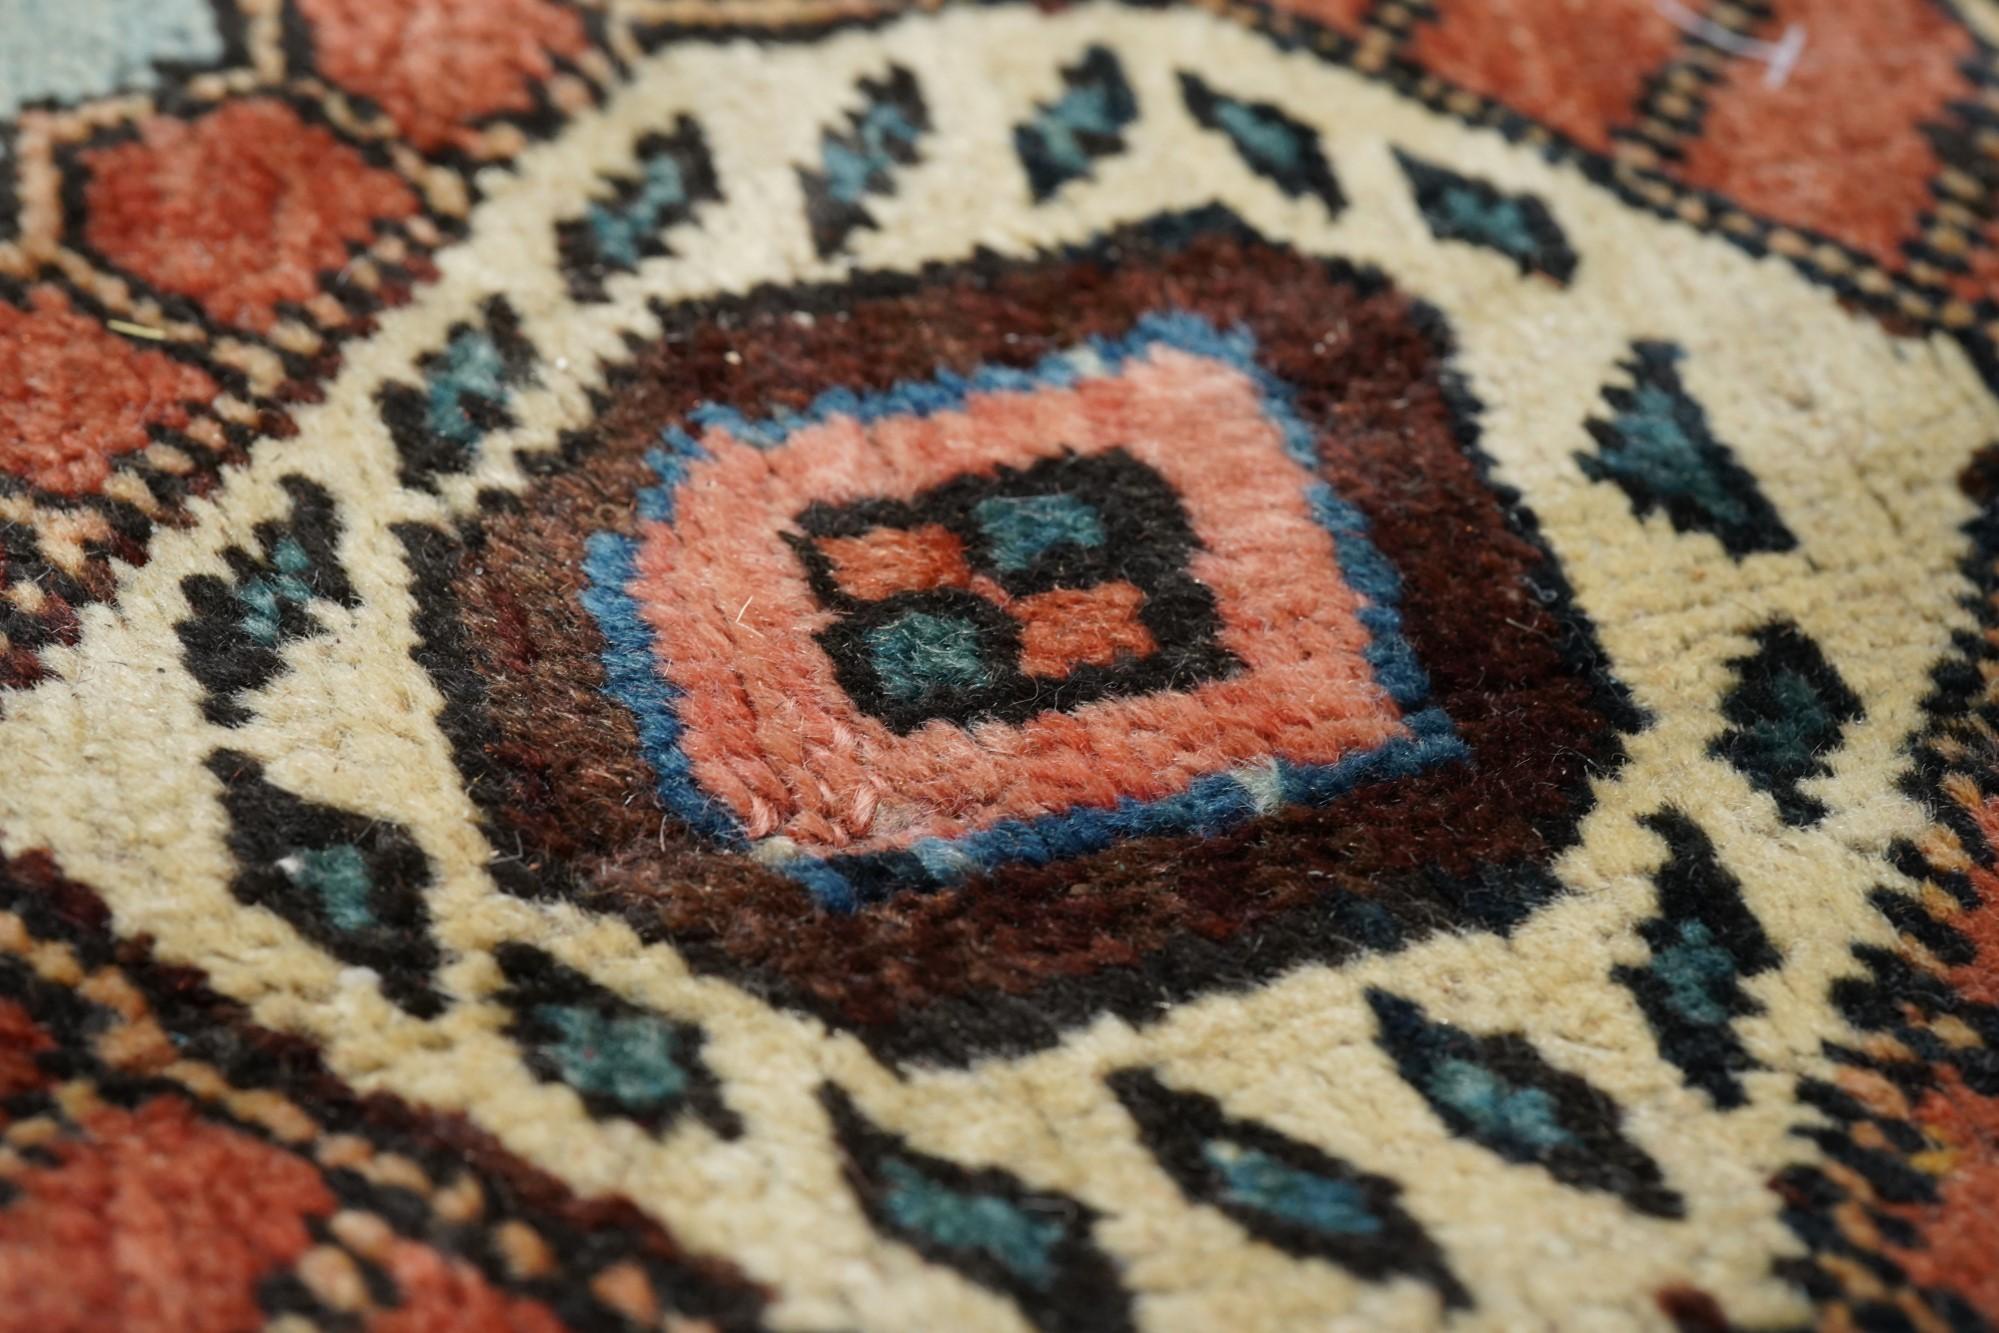 Late 19th Century Antique Bakhshayesh Rug For Sale